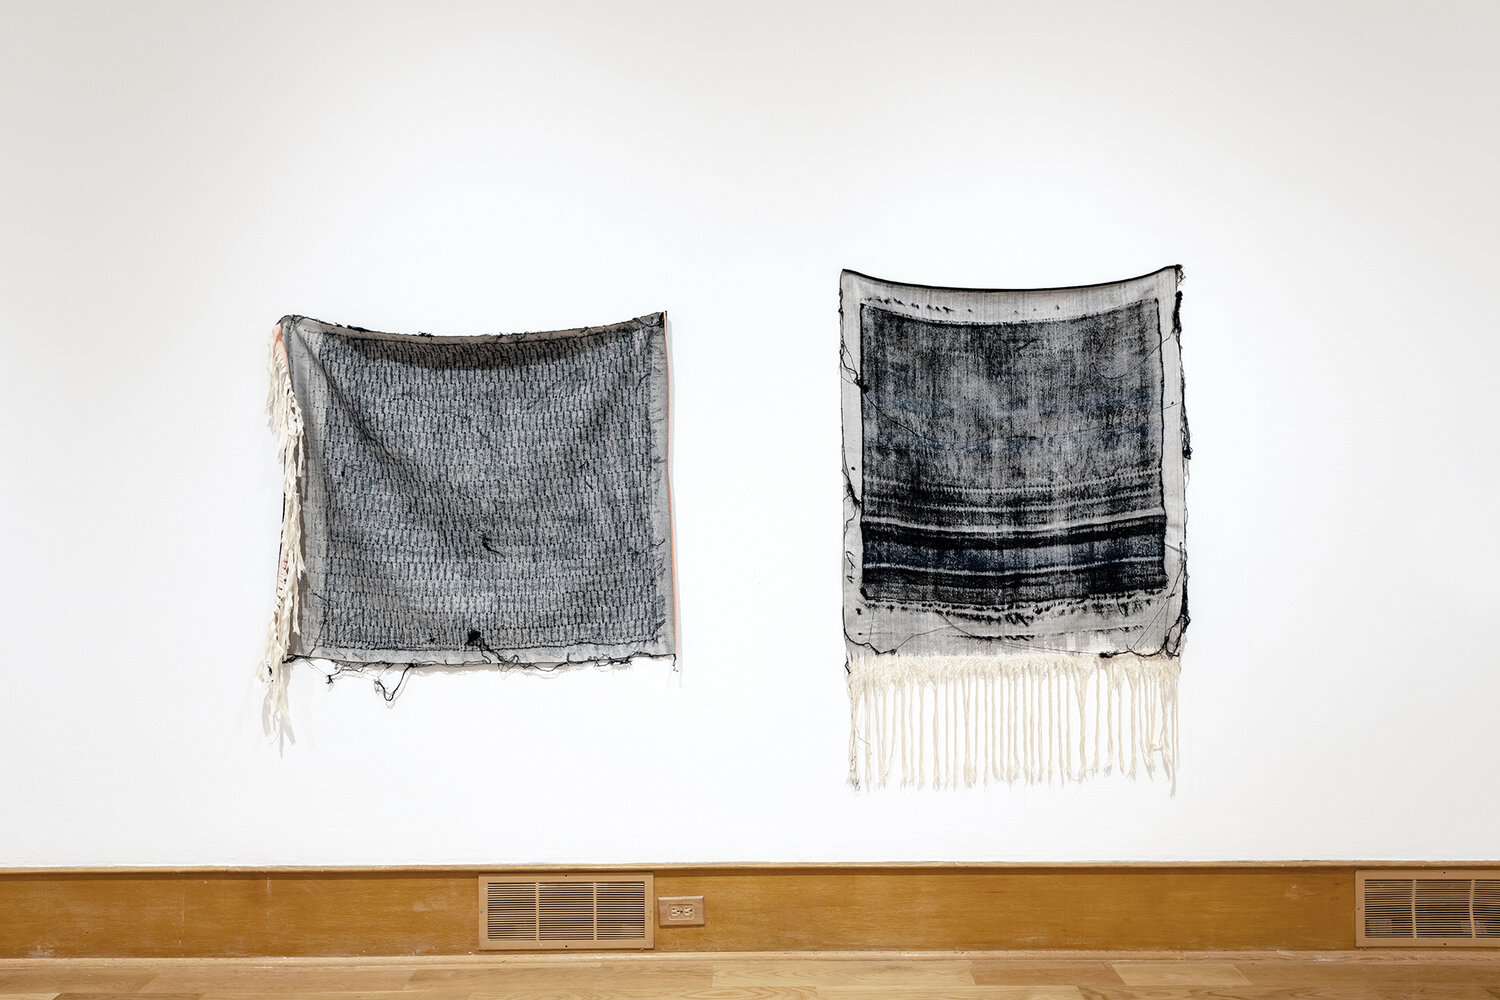 Frottage 064, Frottage 068&nbsp;, 2017 - 2018&nbsp;, cotton and wool Queer Abstraction, 2019&nbsp;Des Moines Art Center; Des Moines, IA&nbsp;&nbsp;Photo courtesy of Des Moines Art Center&nbsp;Photo credit: Rich Sanders, Des Moines